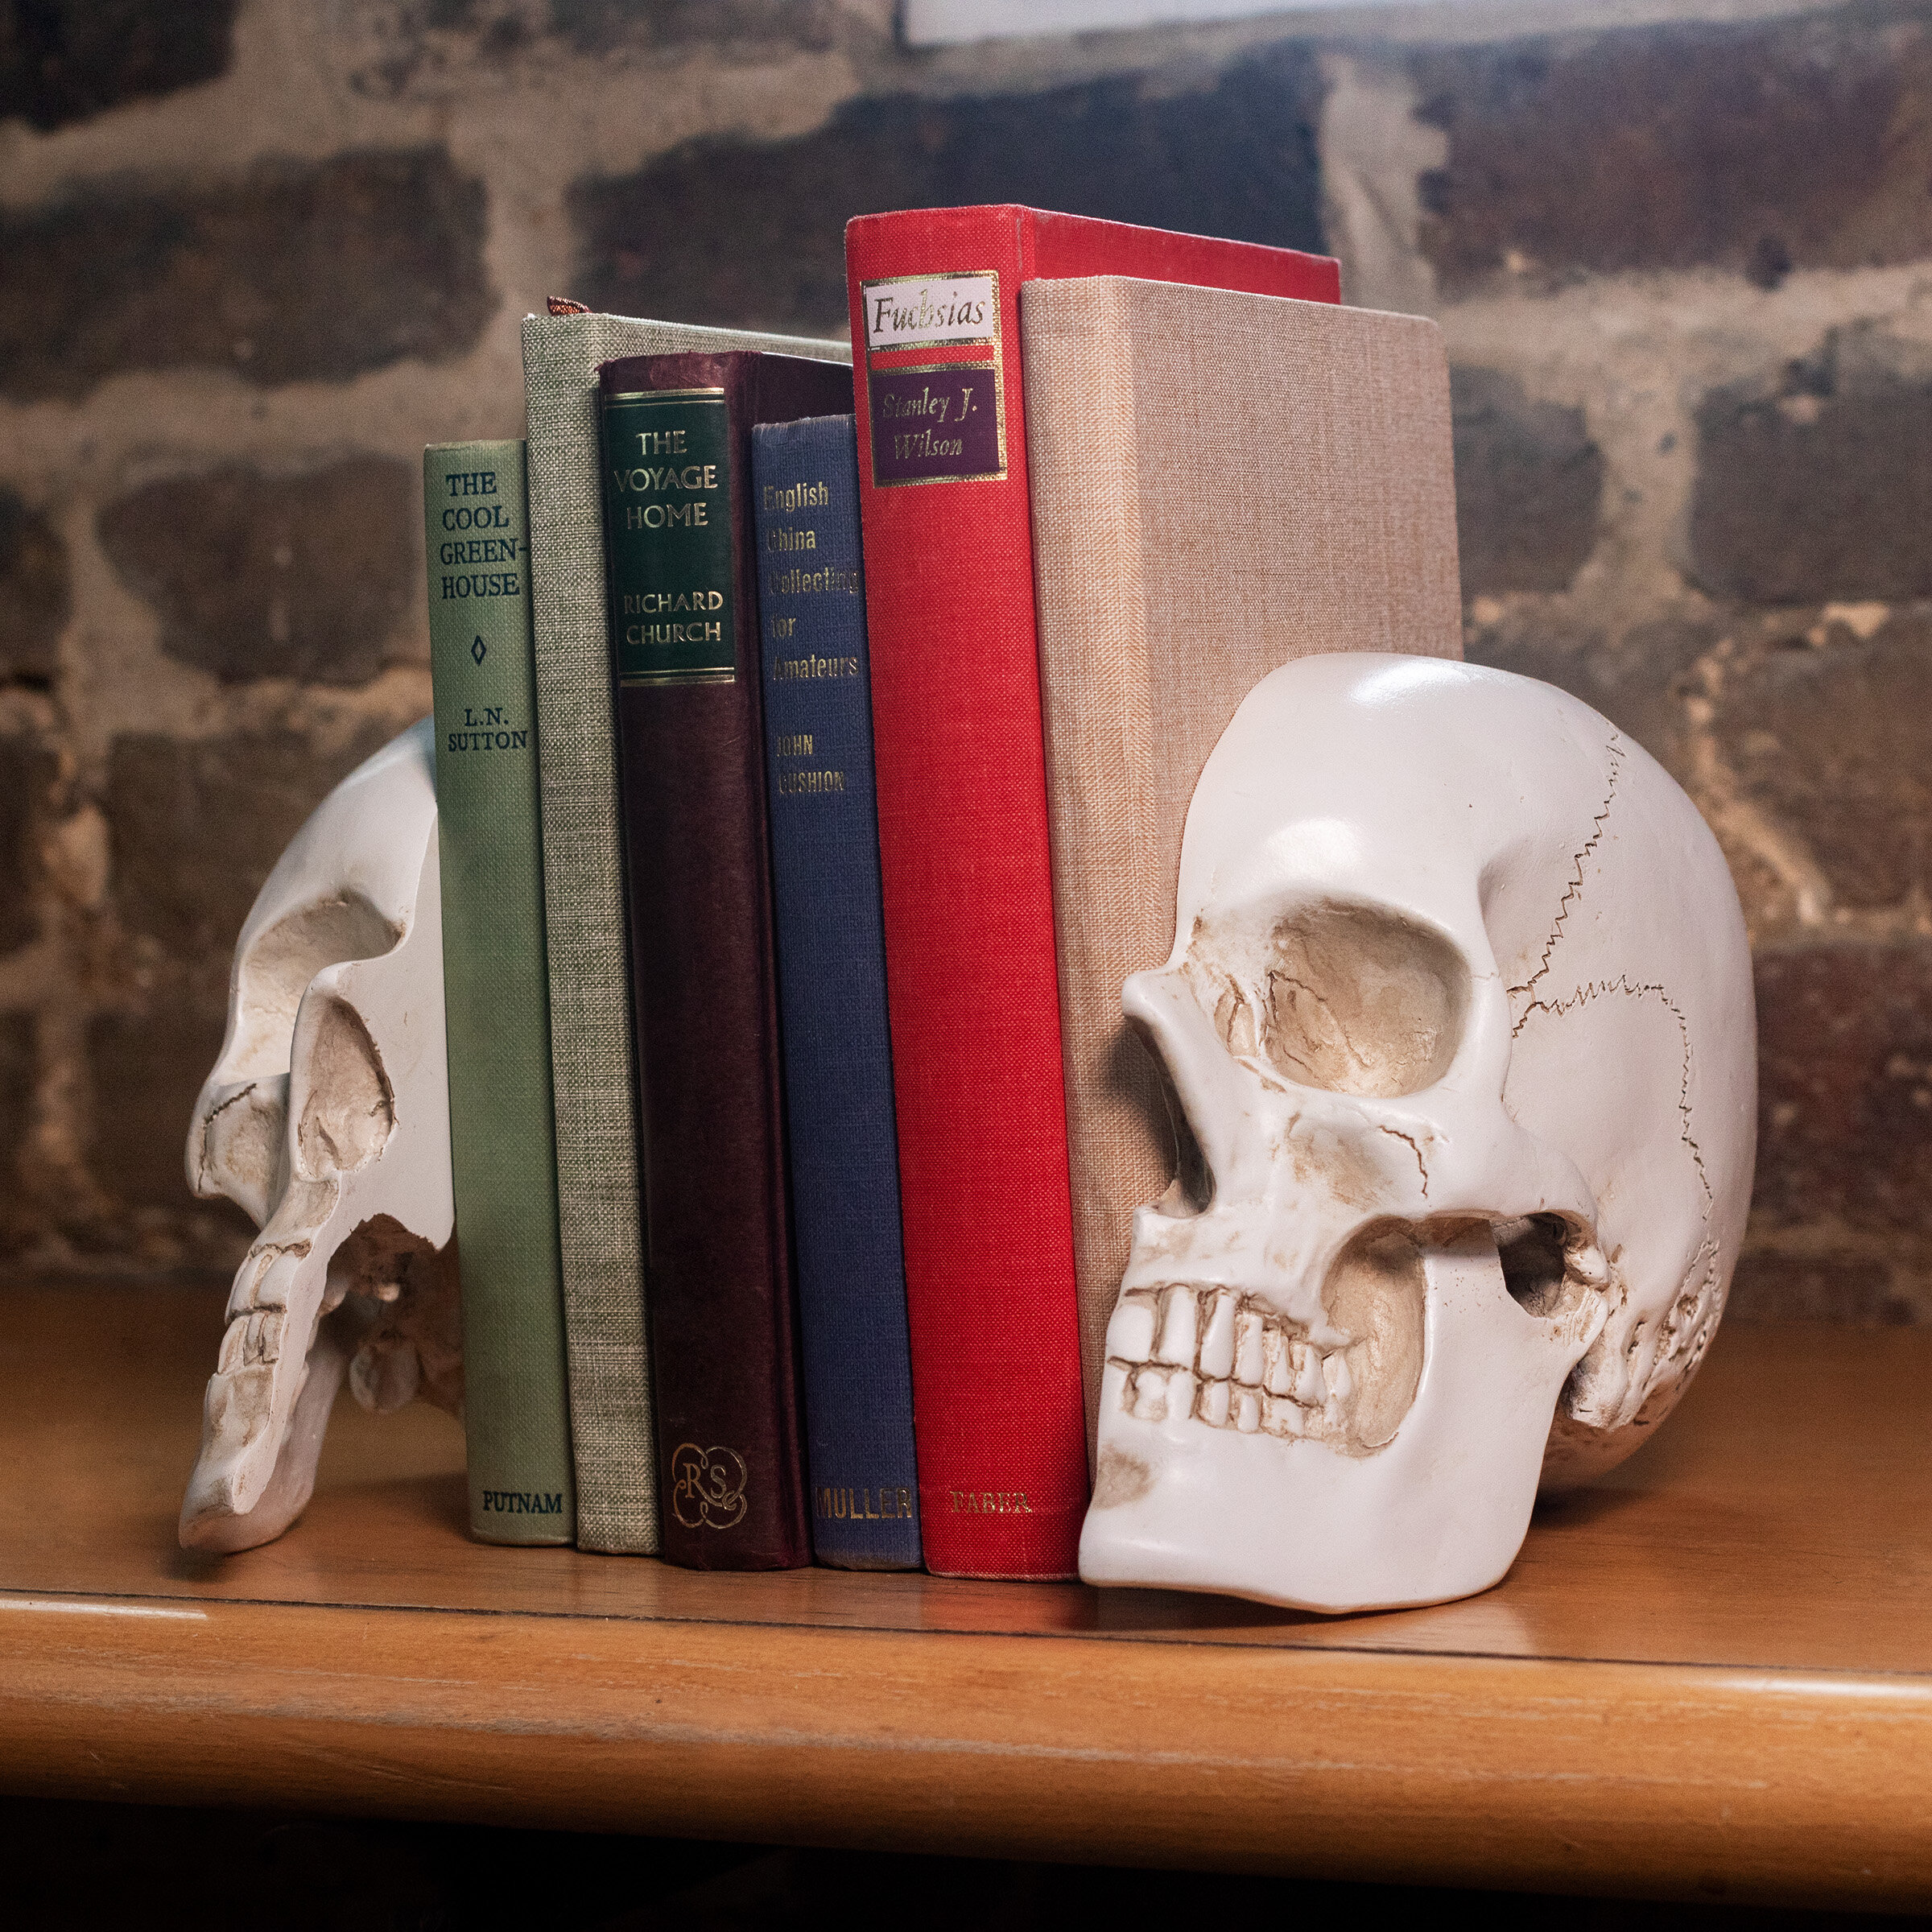 on a shelf against a brickwall the skull bookends containing books